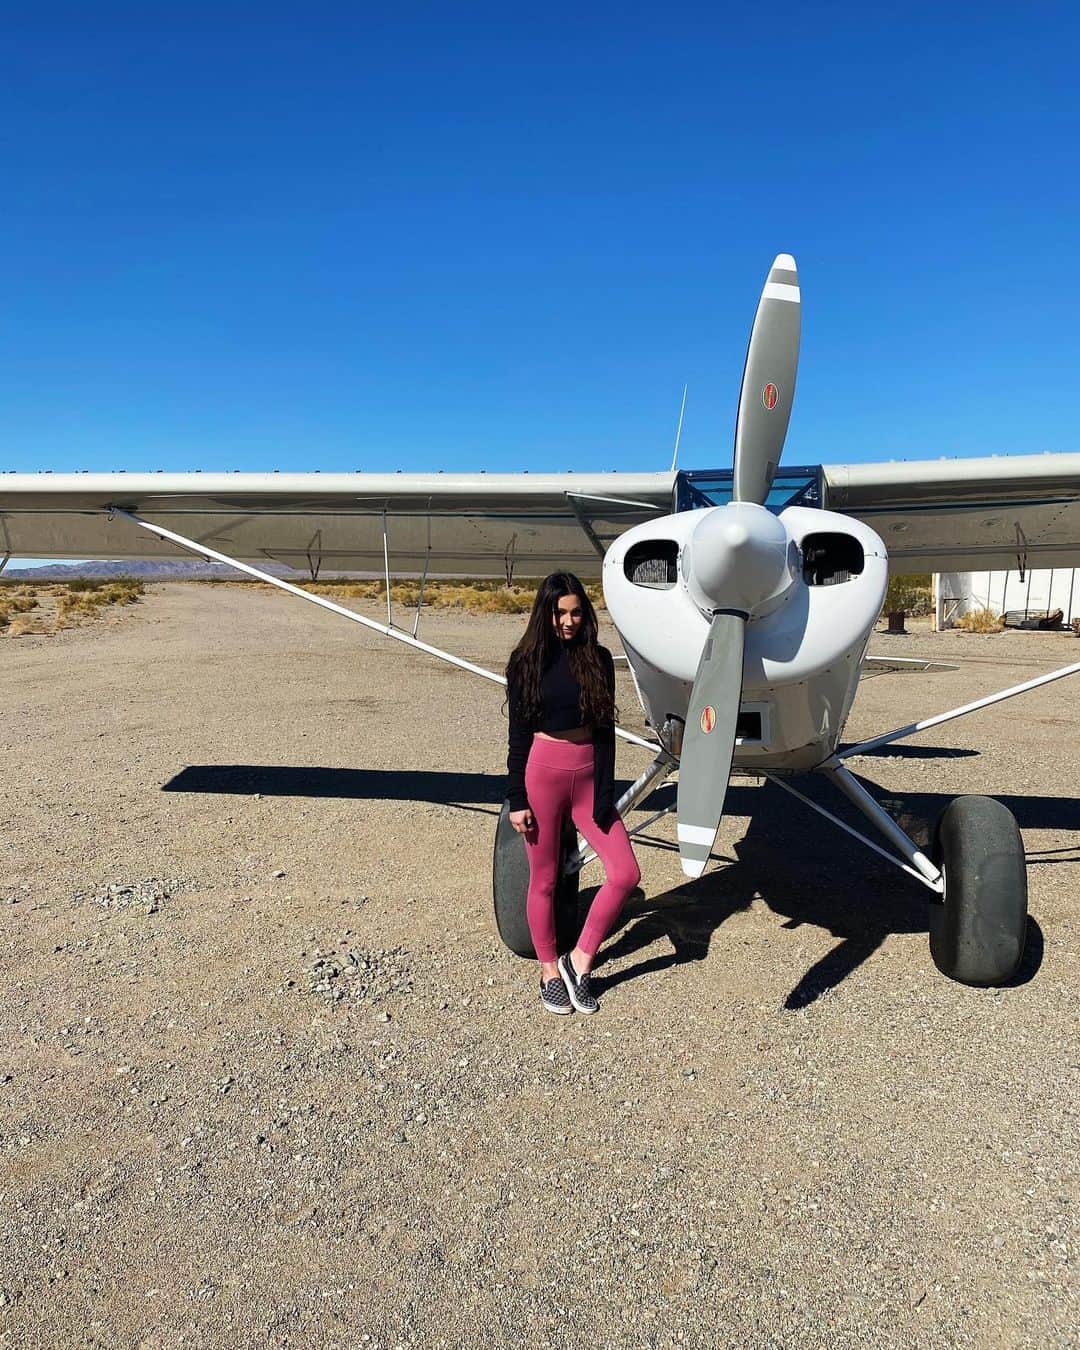 Kristina Bashamのインスタグラム：「Had to fly here, in the middle of nowhere. With Husky 5QT Well, I can cross that one off the list 😄」